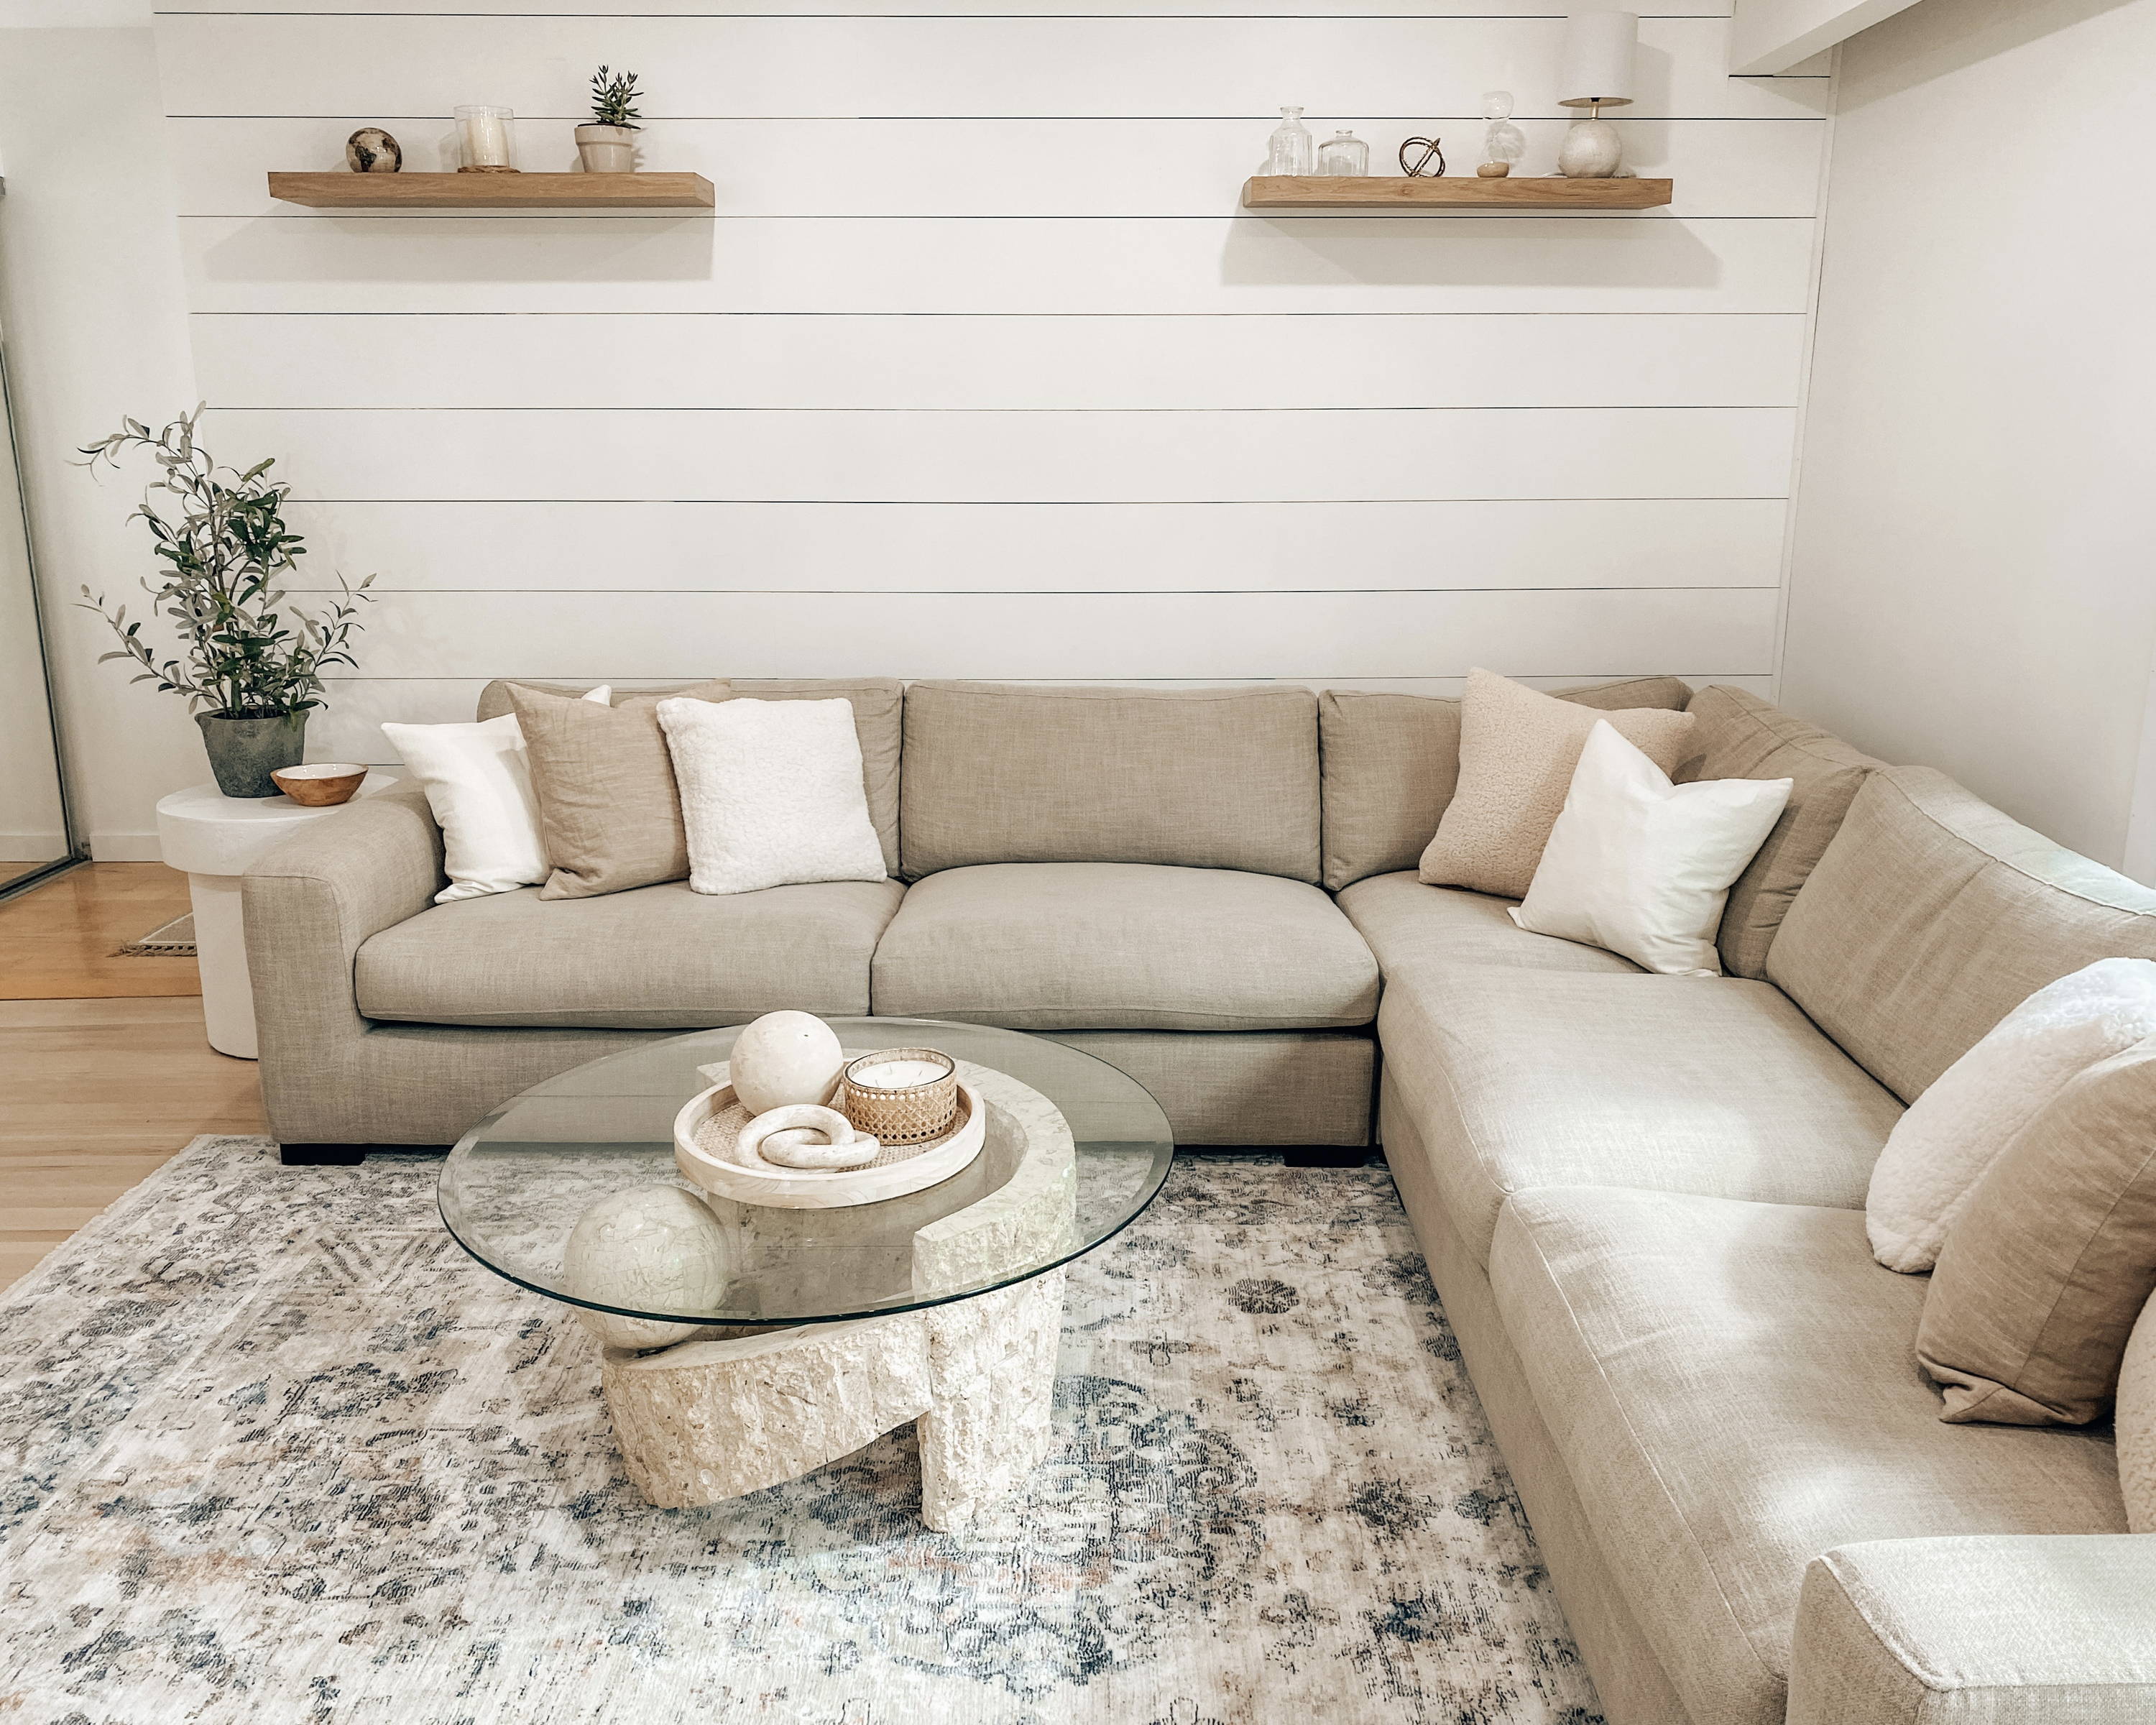 A cream coloured sectional in a bright living room.